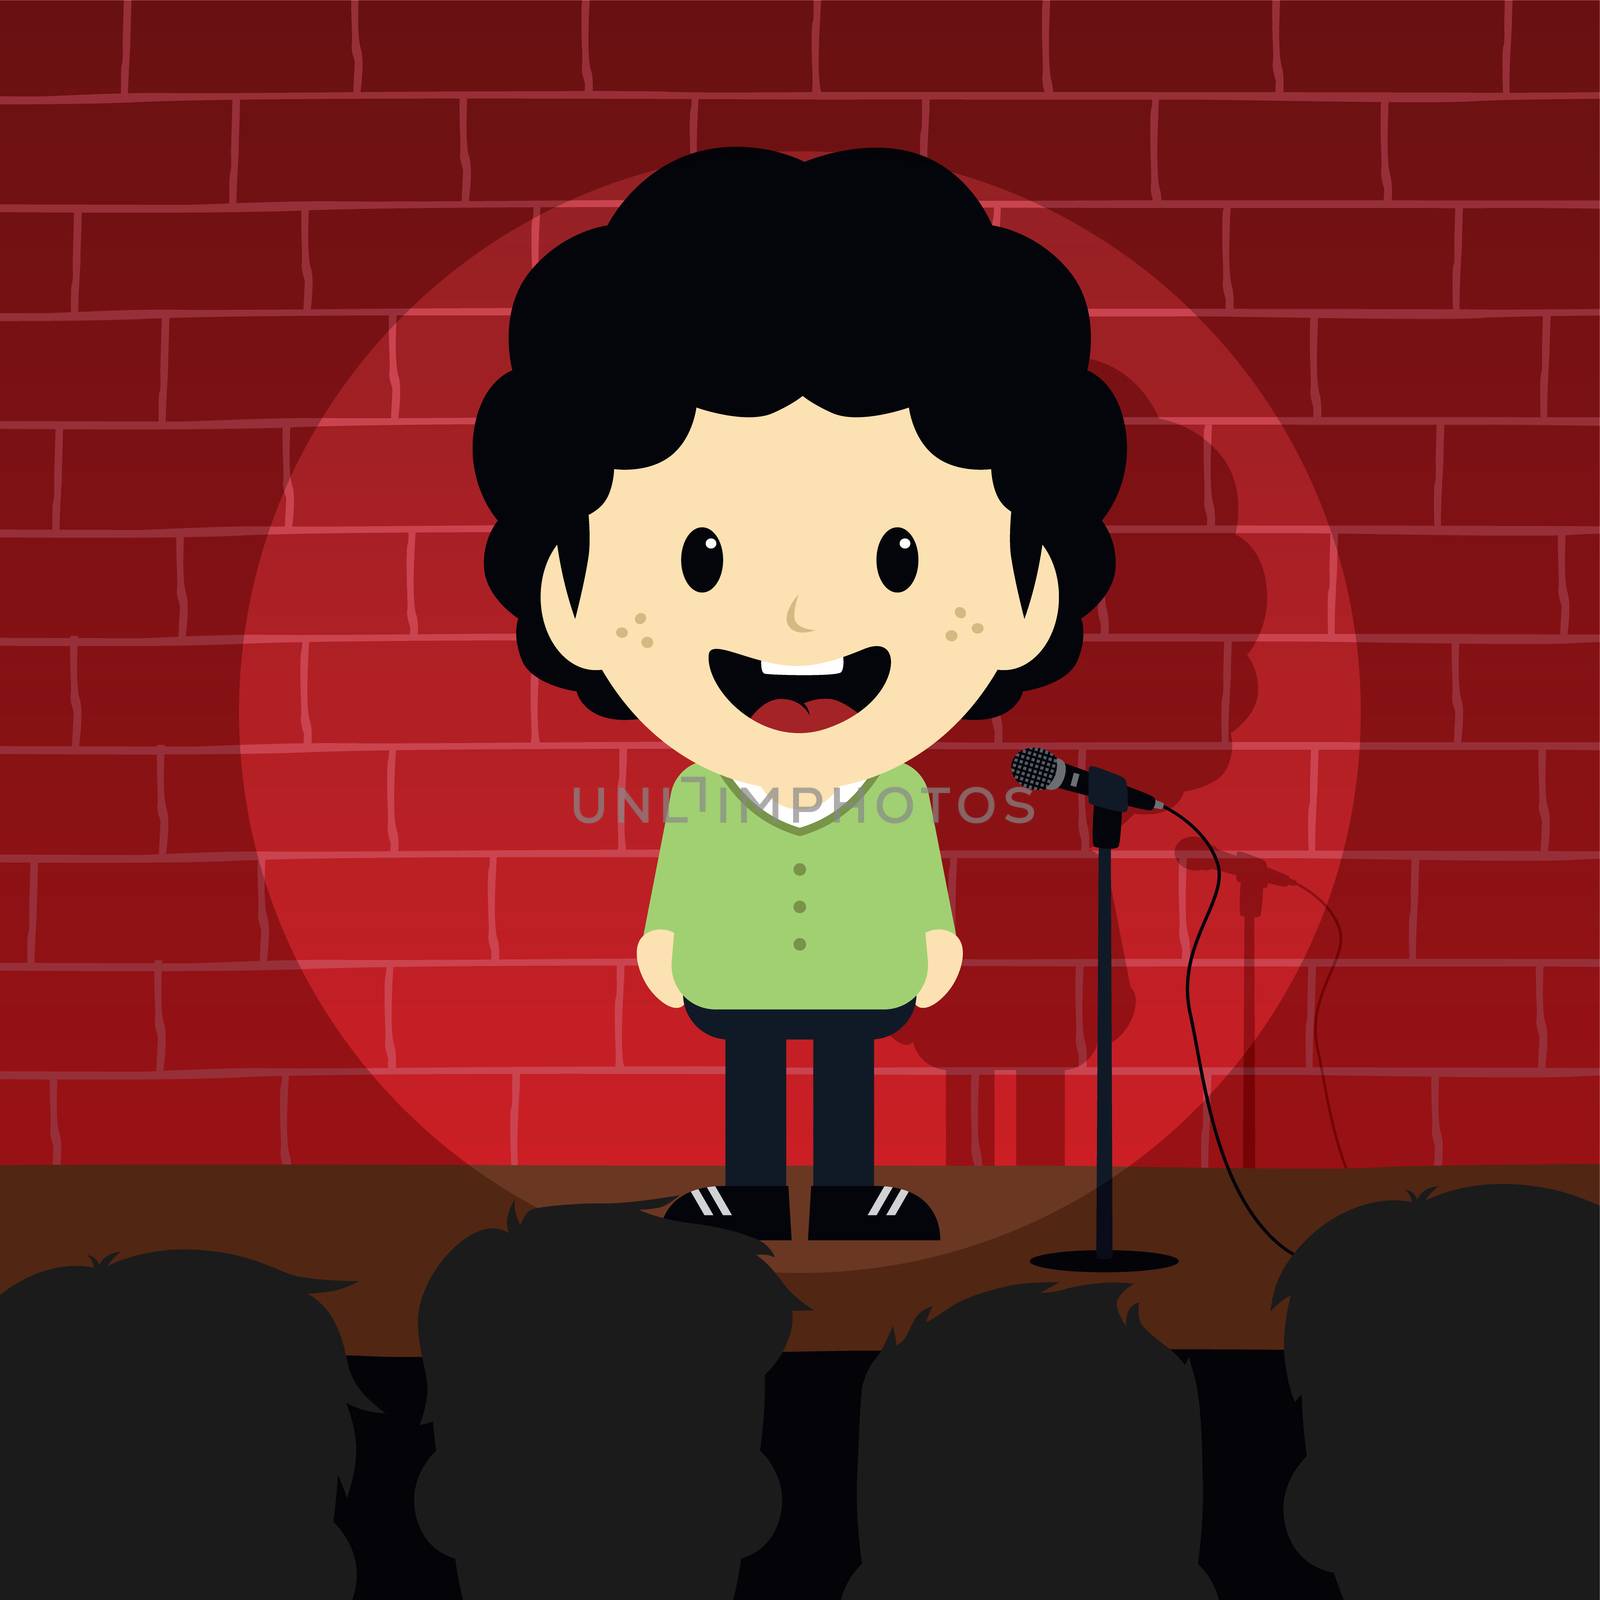 stand up comedy by vector1st